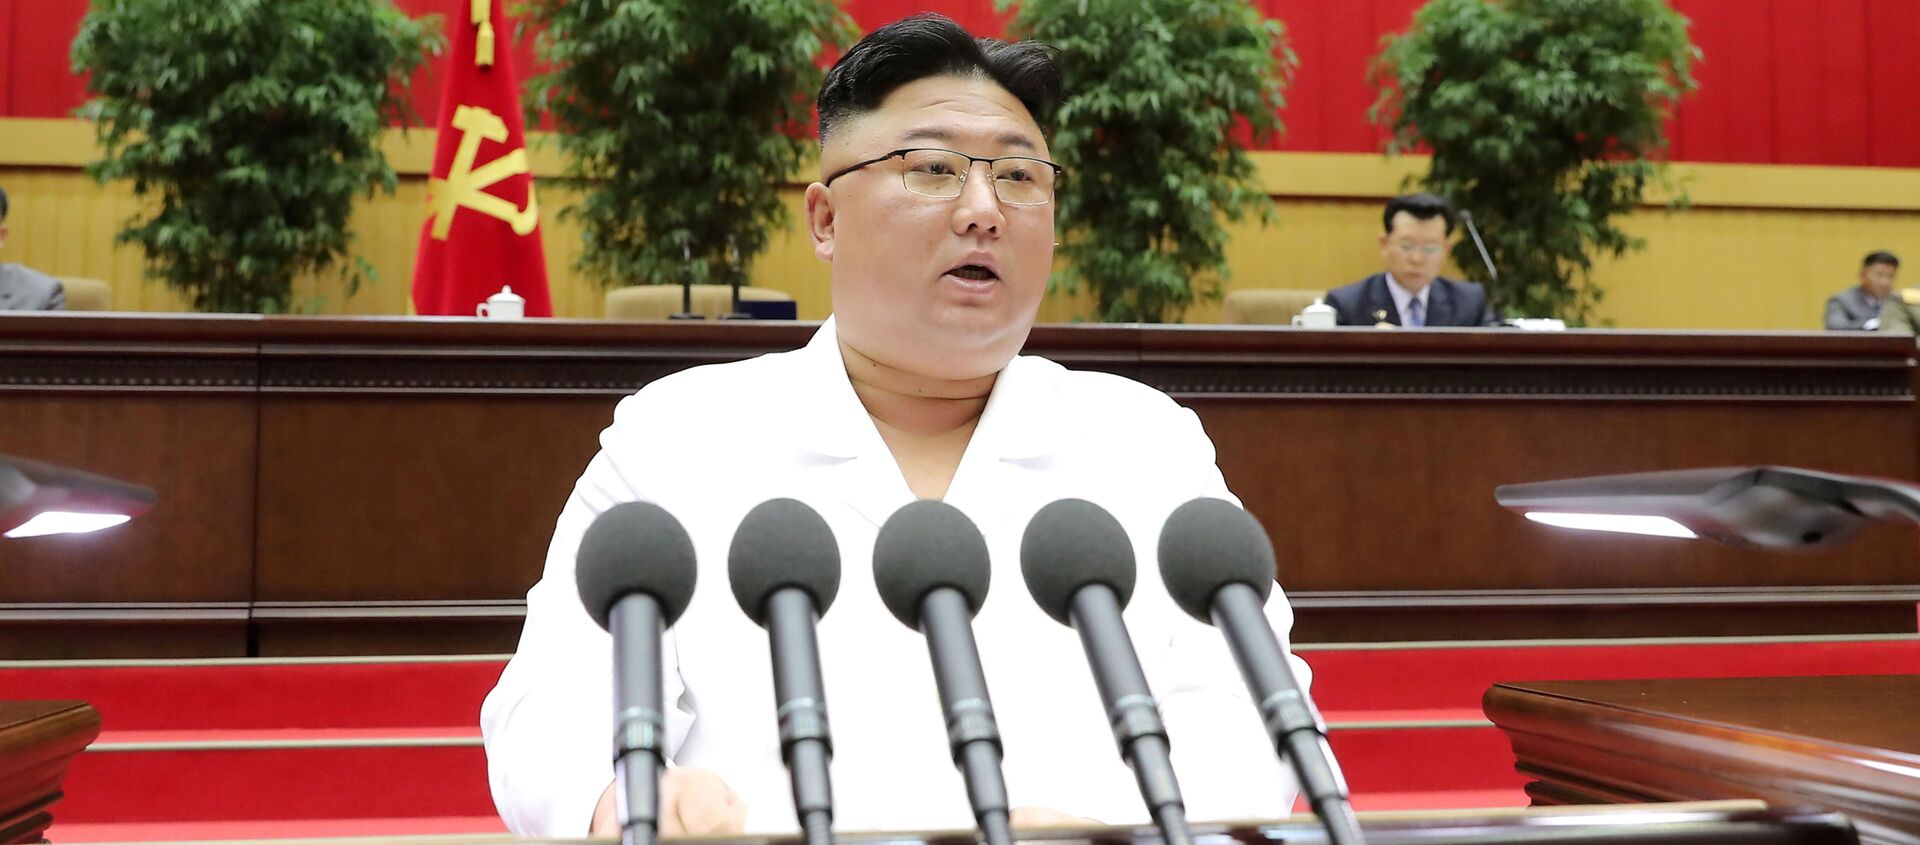 North Korean leader Kim Jong Un addresses a conference of cell secretaries of the ruling Workers' Party in Pyongyang, in this undated photo released on April 7, 2021 by North Korea's Korean Central News Agency (KCNA). - Sputnik International, 1920, 07.04.2021